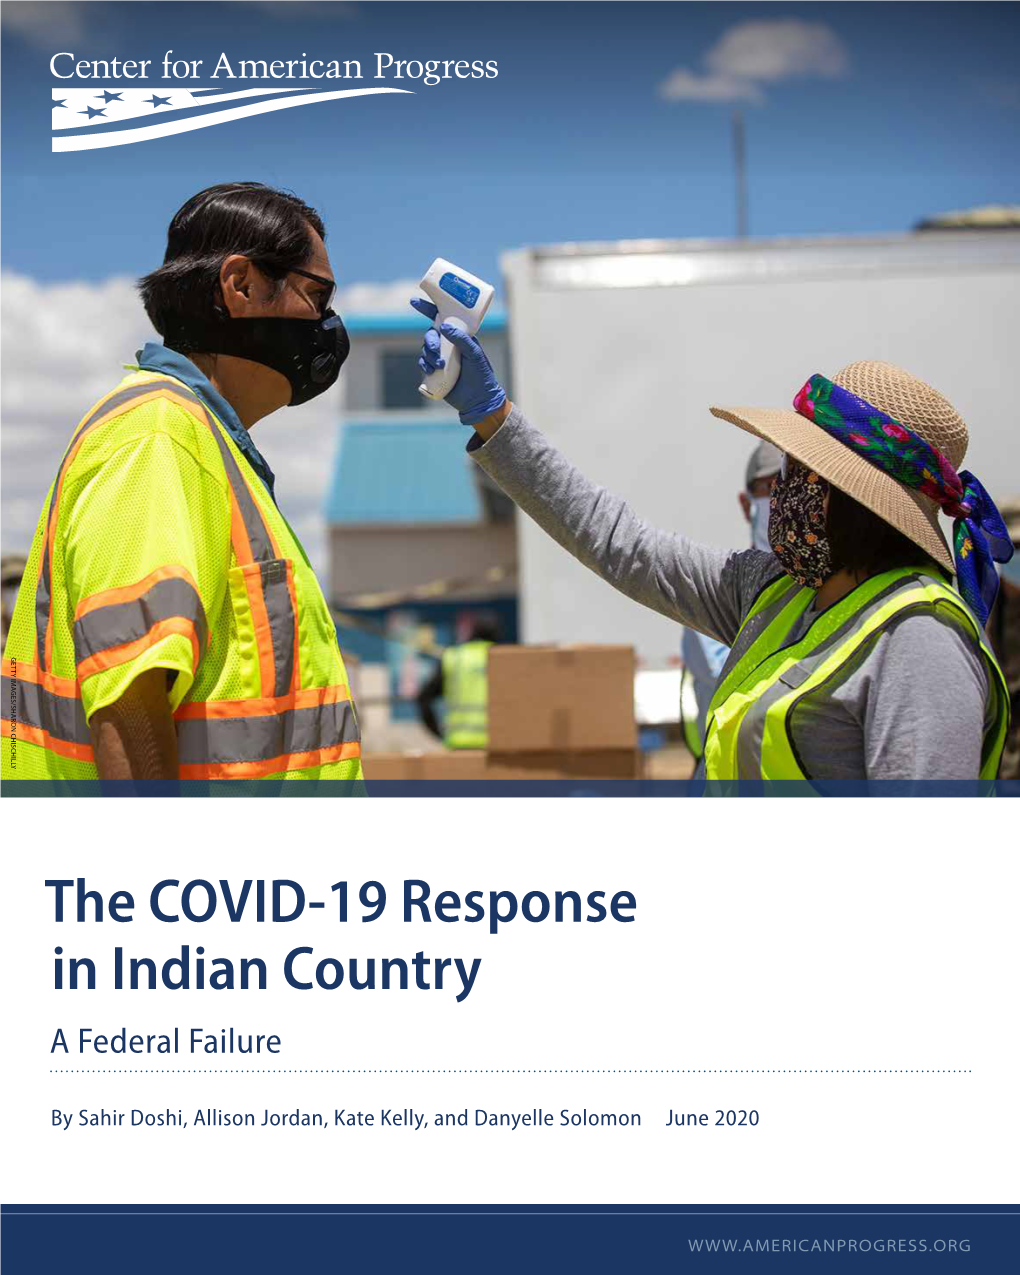 The COVID-19 Response in Indian Country a Federal Failure